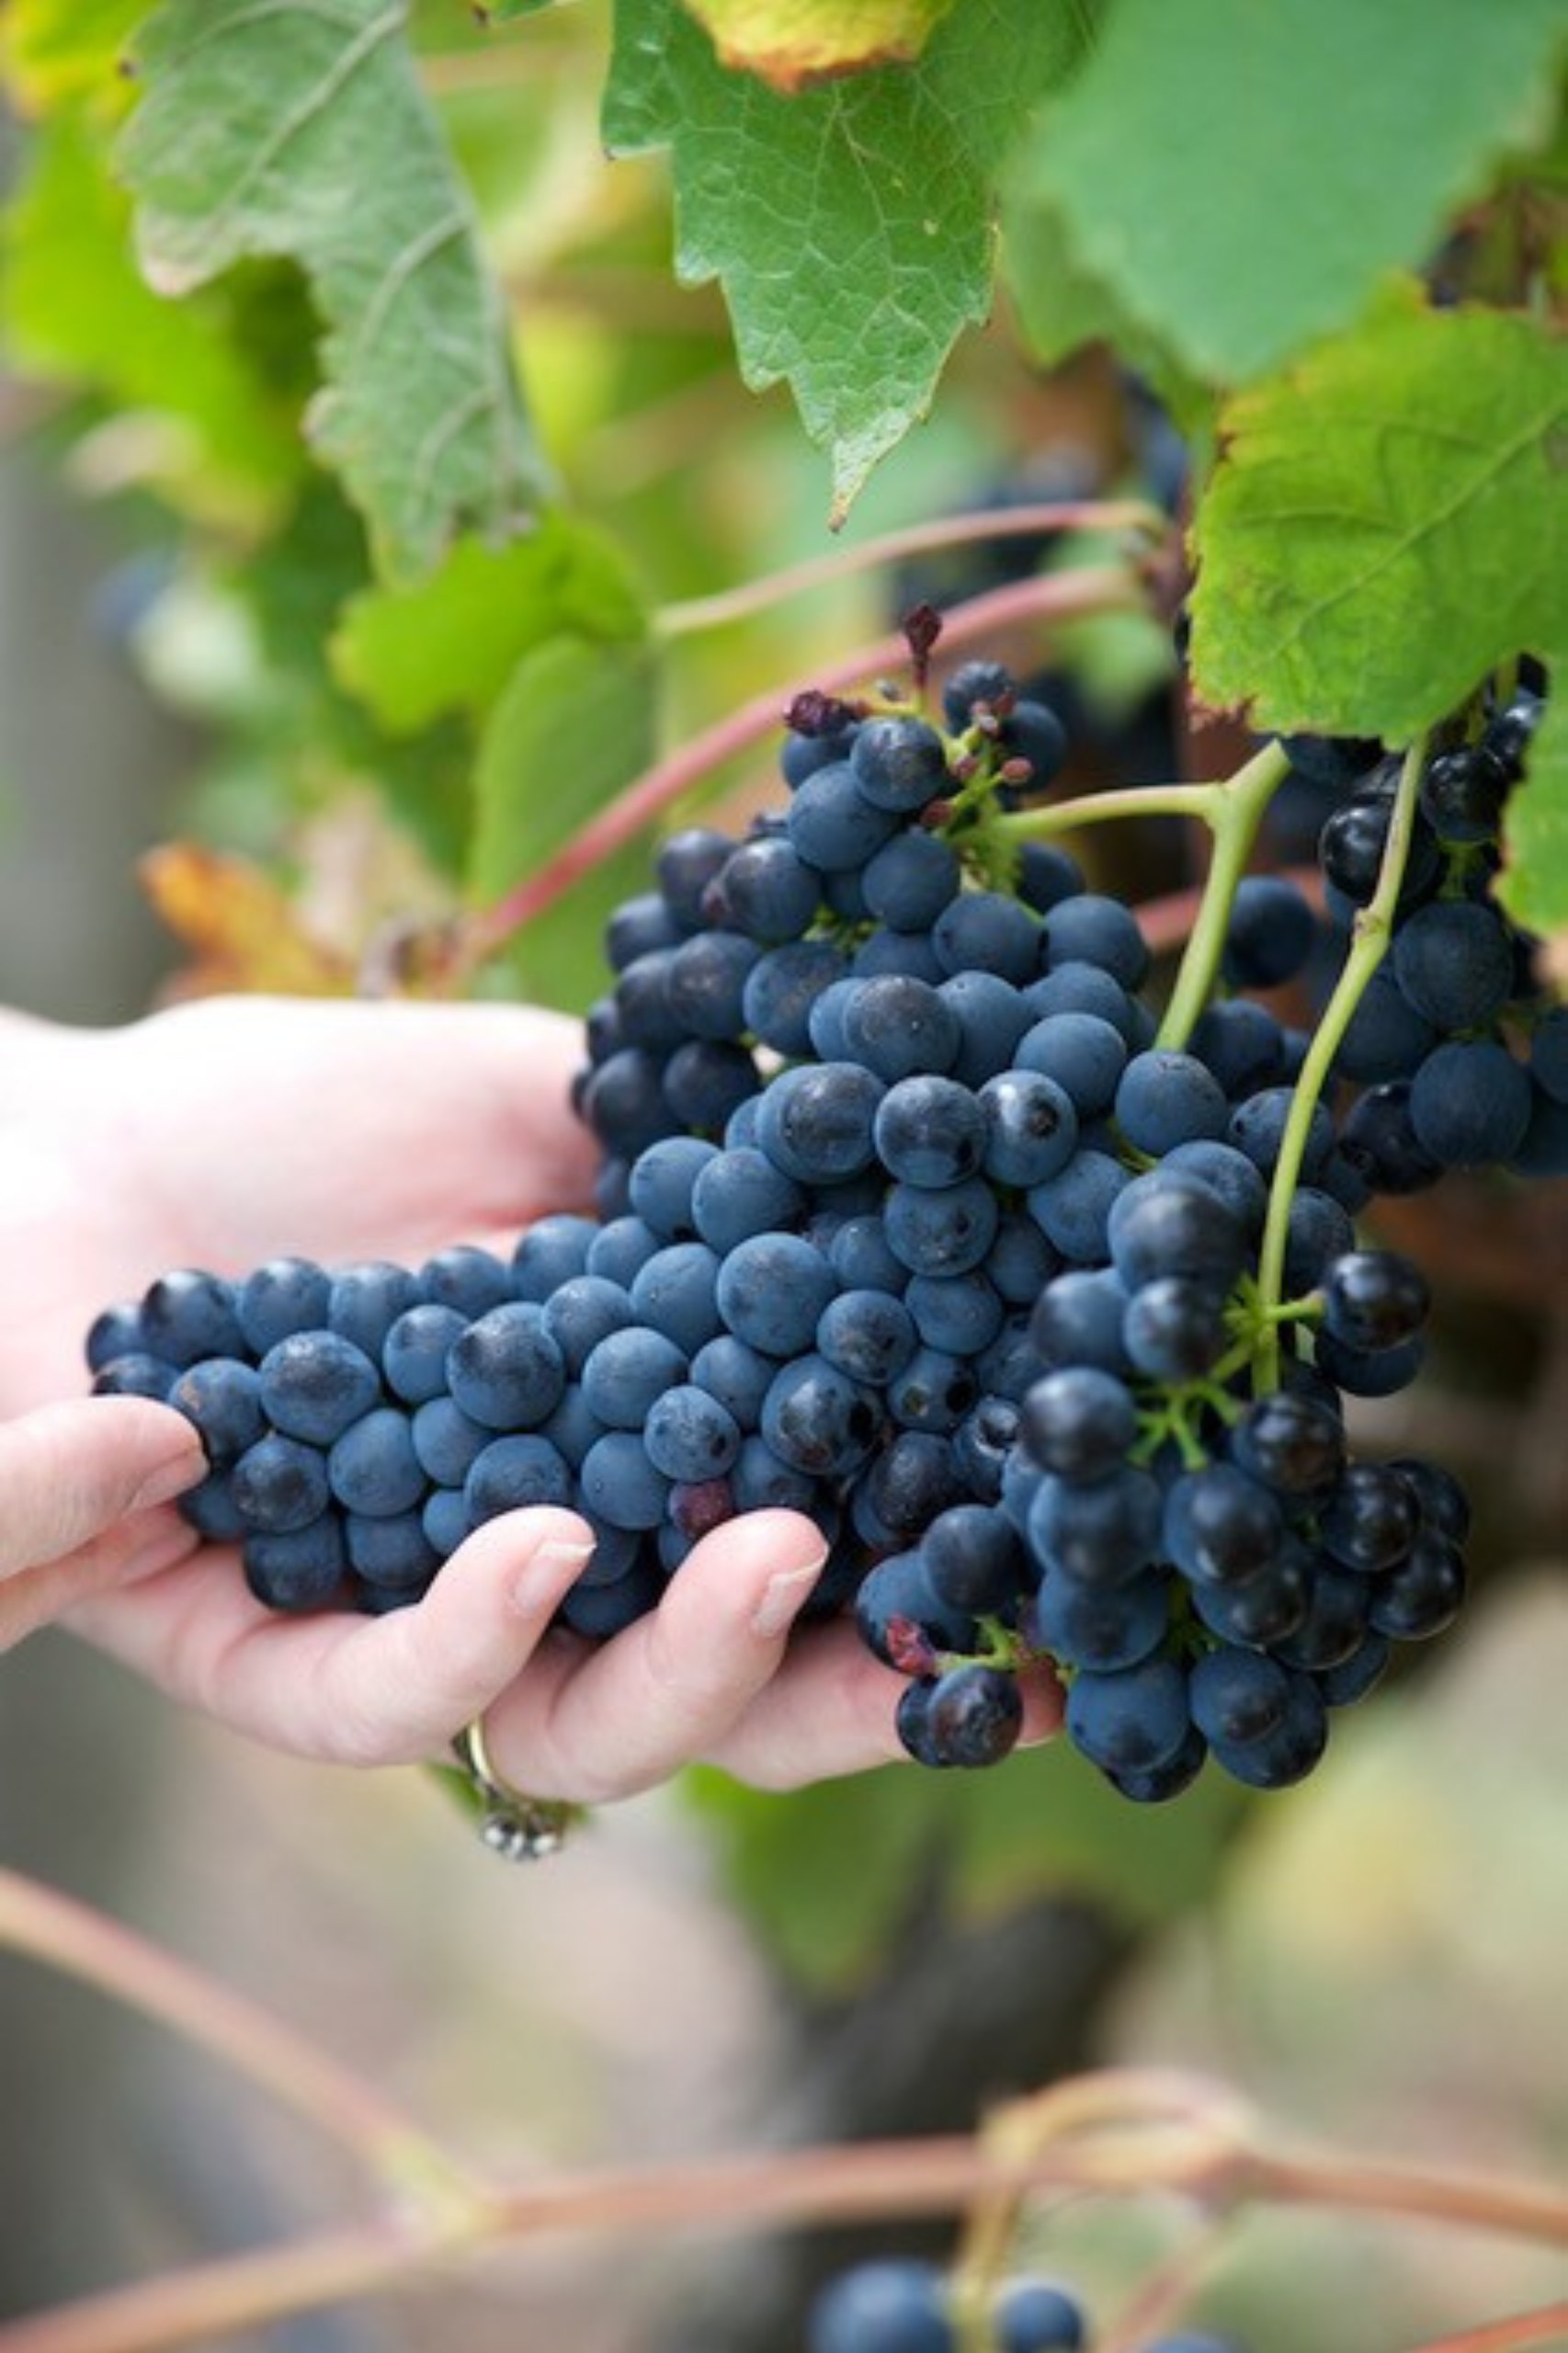 Grapes from Banks Road in Geelong wine region